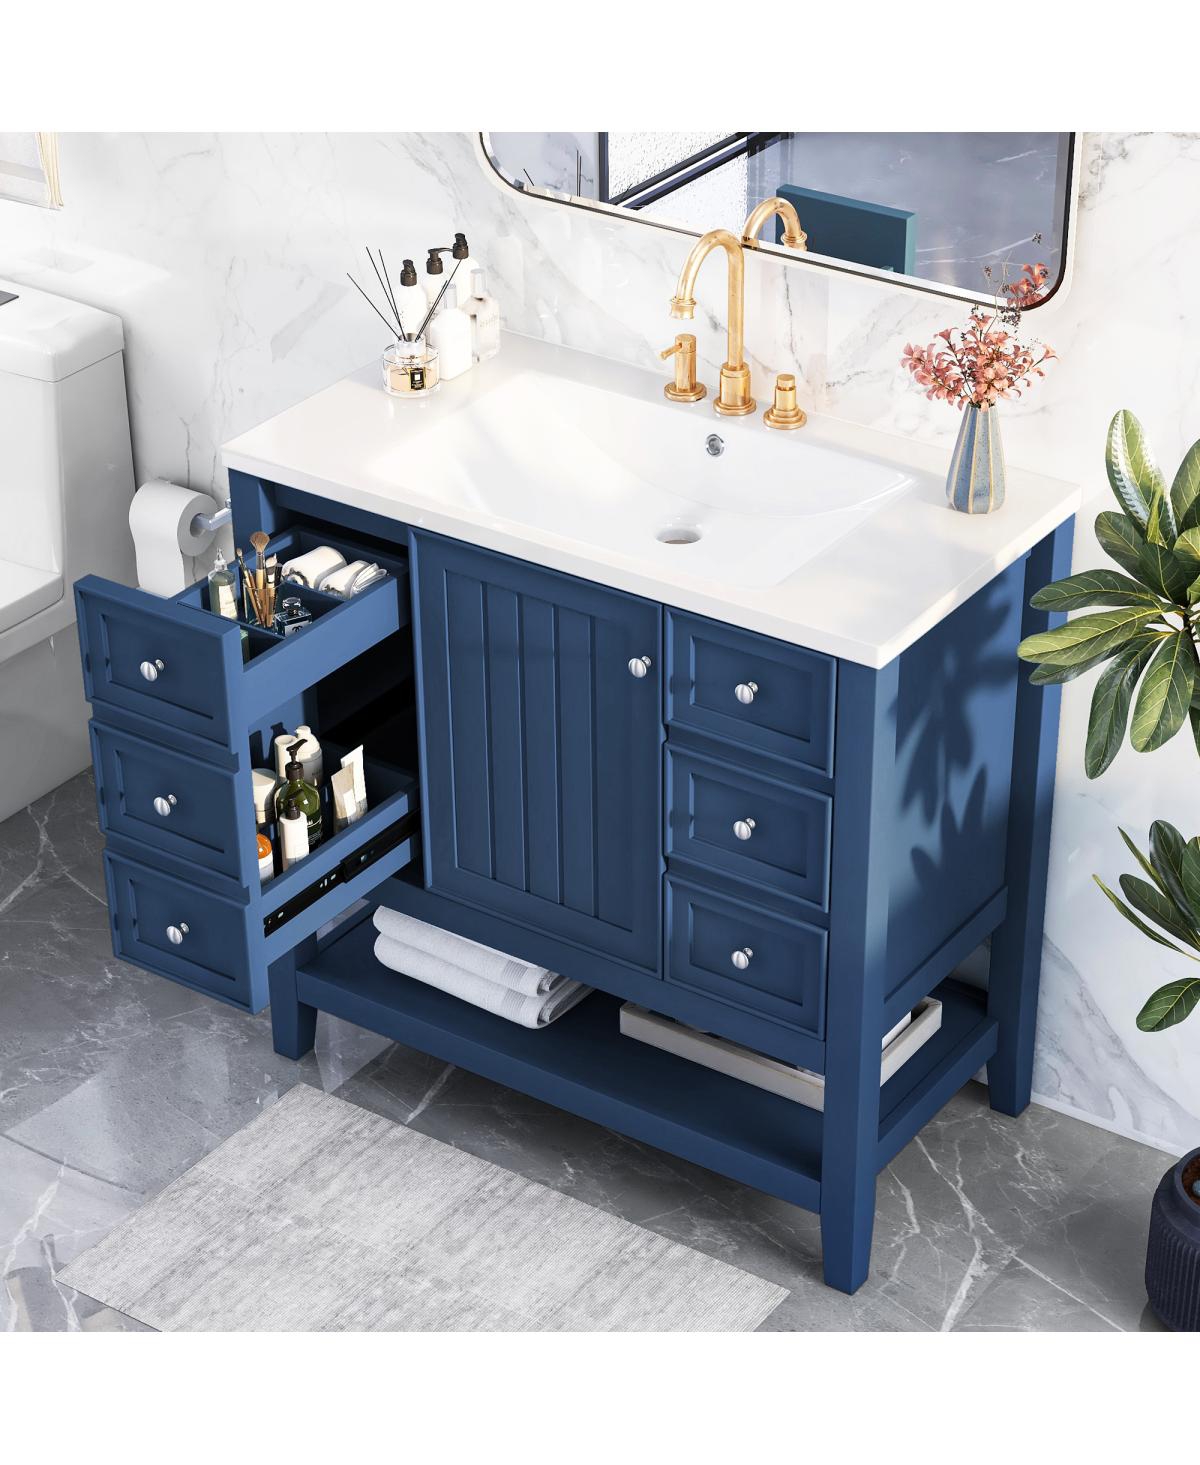 36" Bathroom Vanity With Sink Combo, One Cabinet And Three Drawers, Solid Wood And Mdf Board, Blue - Blue